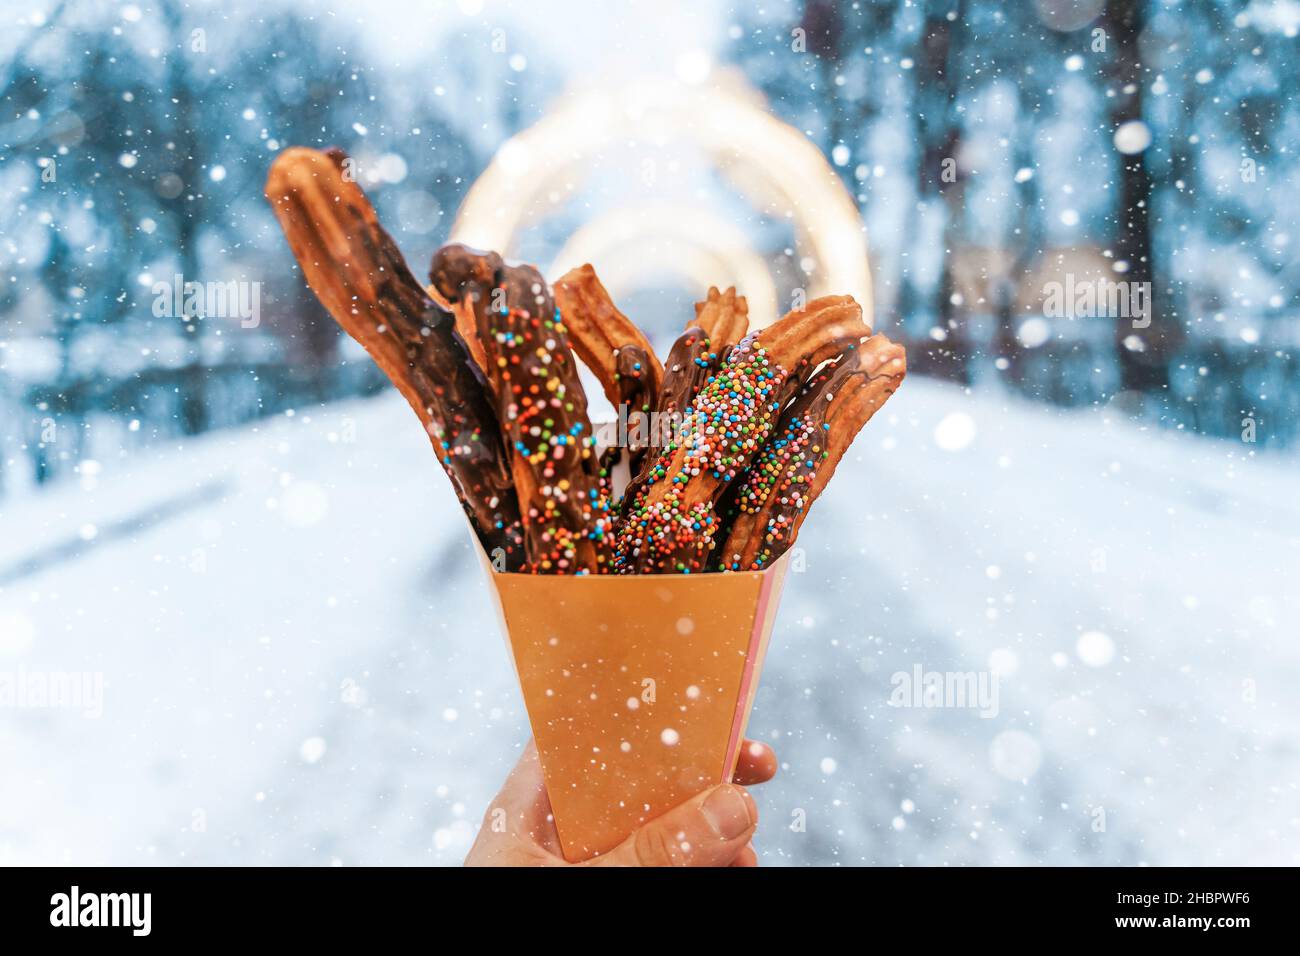 Churros waffles in a hand on the winter snow market. Churros Mexican street food dessert. Fast food sweets, Christmas fair cookies. High quality photo Stock Photo